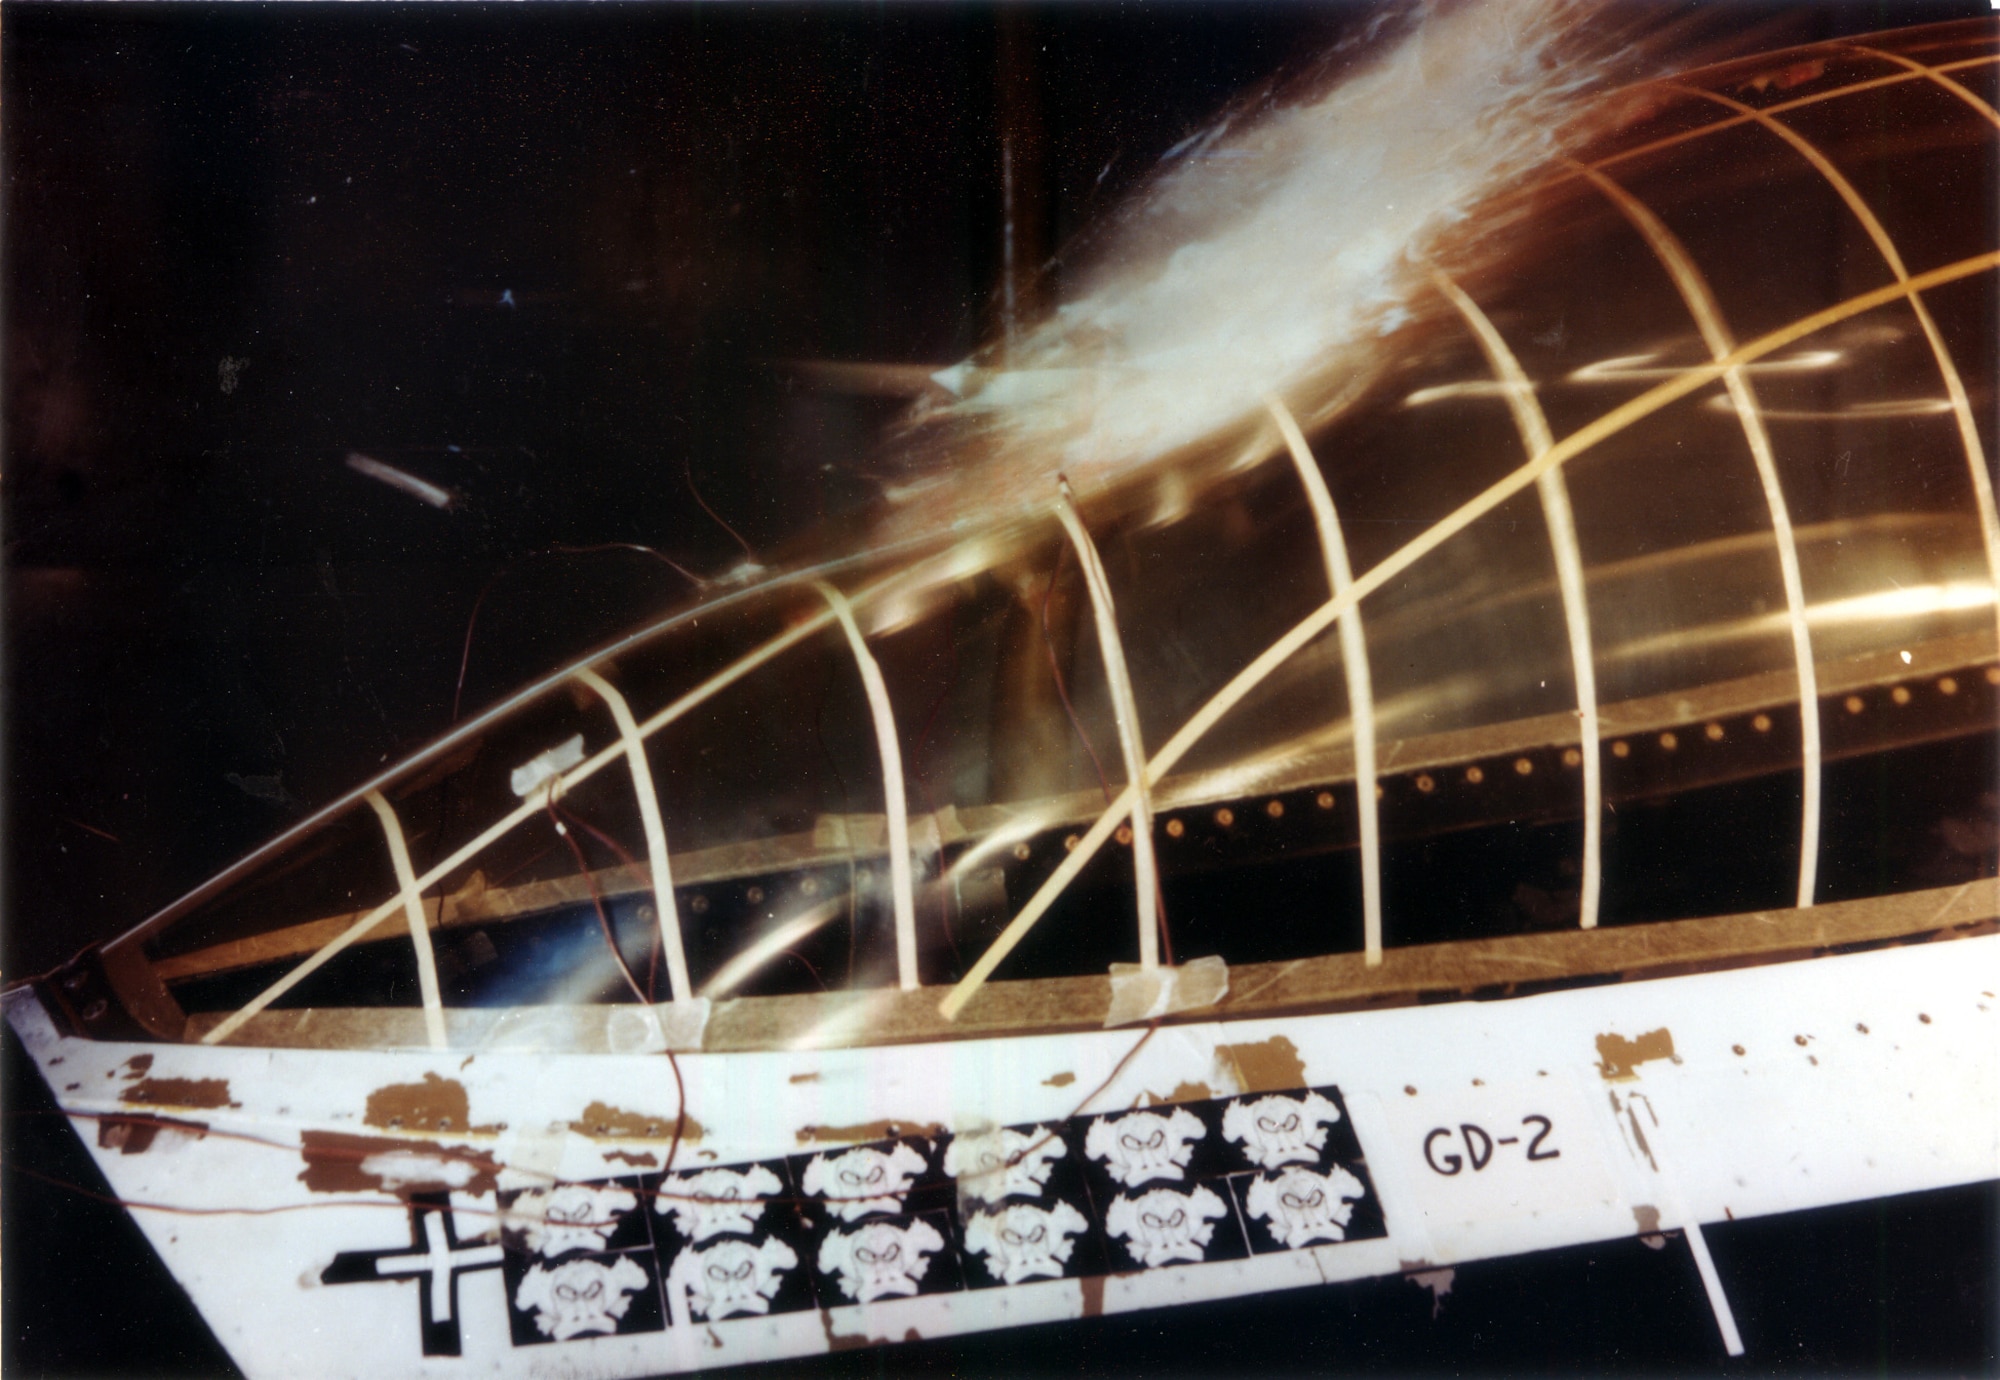 A chicken carcass launched at the Bird Impact Range at Arnold Air Force Base, Tennessee, strikes the canopy of an F-16 Fighting Falcon during bird strike impact testing in 1983. The range, more famously known as the “Chicken Gun,” was used to simulate in-flight bird strikes to aircraft canopies and other materials by launching chicken carcasses at test articles. The first shot from the Chicken Gun was fired 50 years ago. (U.S. Air Force photo)